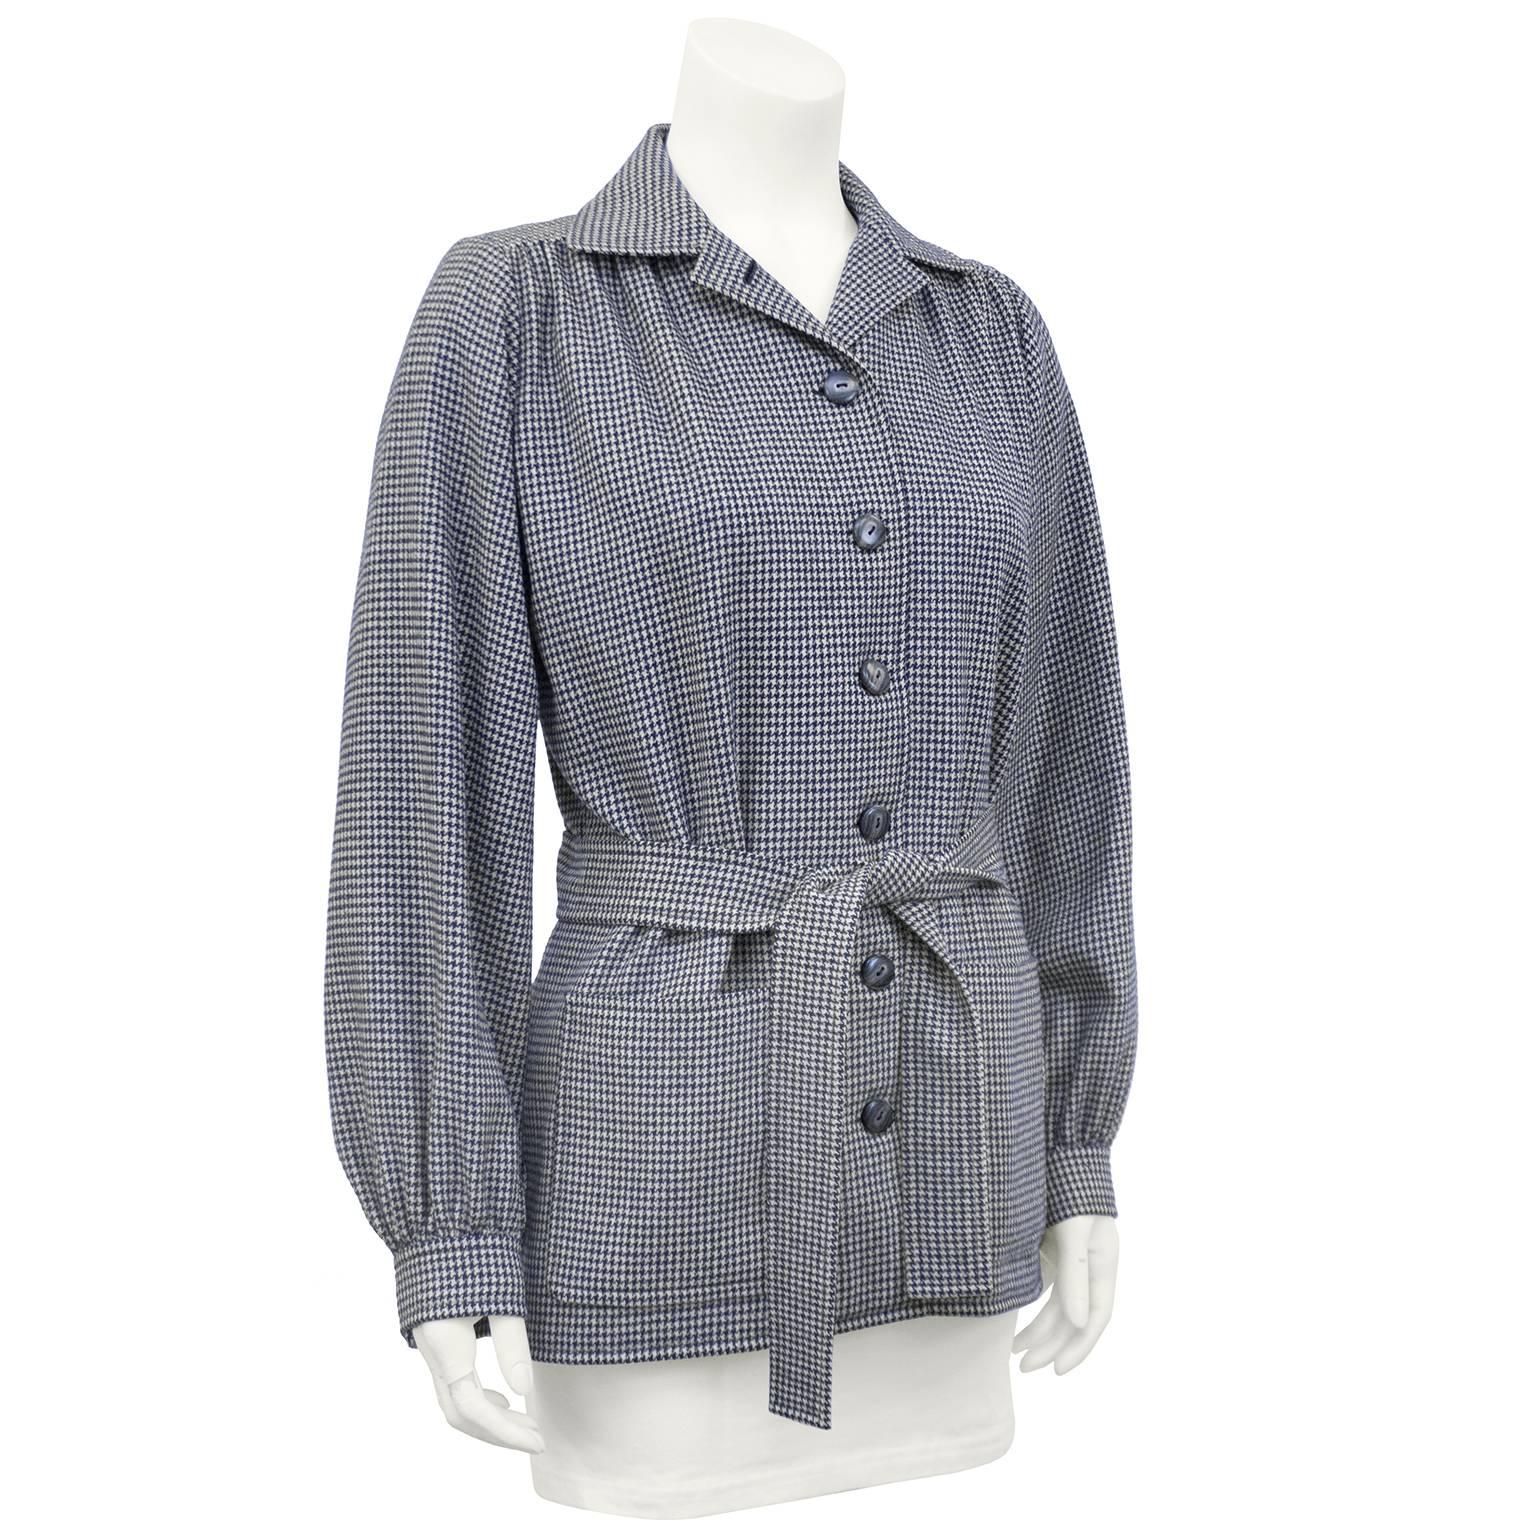 1970s Yves Saint Laurent haute couture navy blue and cream small houndstooth printed belted jacket. Navy blue/grey marble plastic buttons, optional belt, patch pockets at the hips and bishops sleeves. Cream silk lining. Excellent vintage condition.